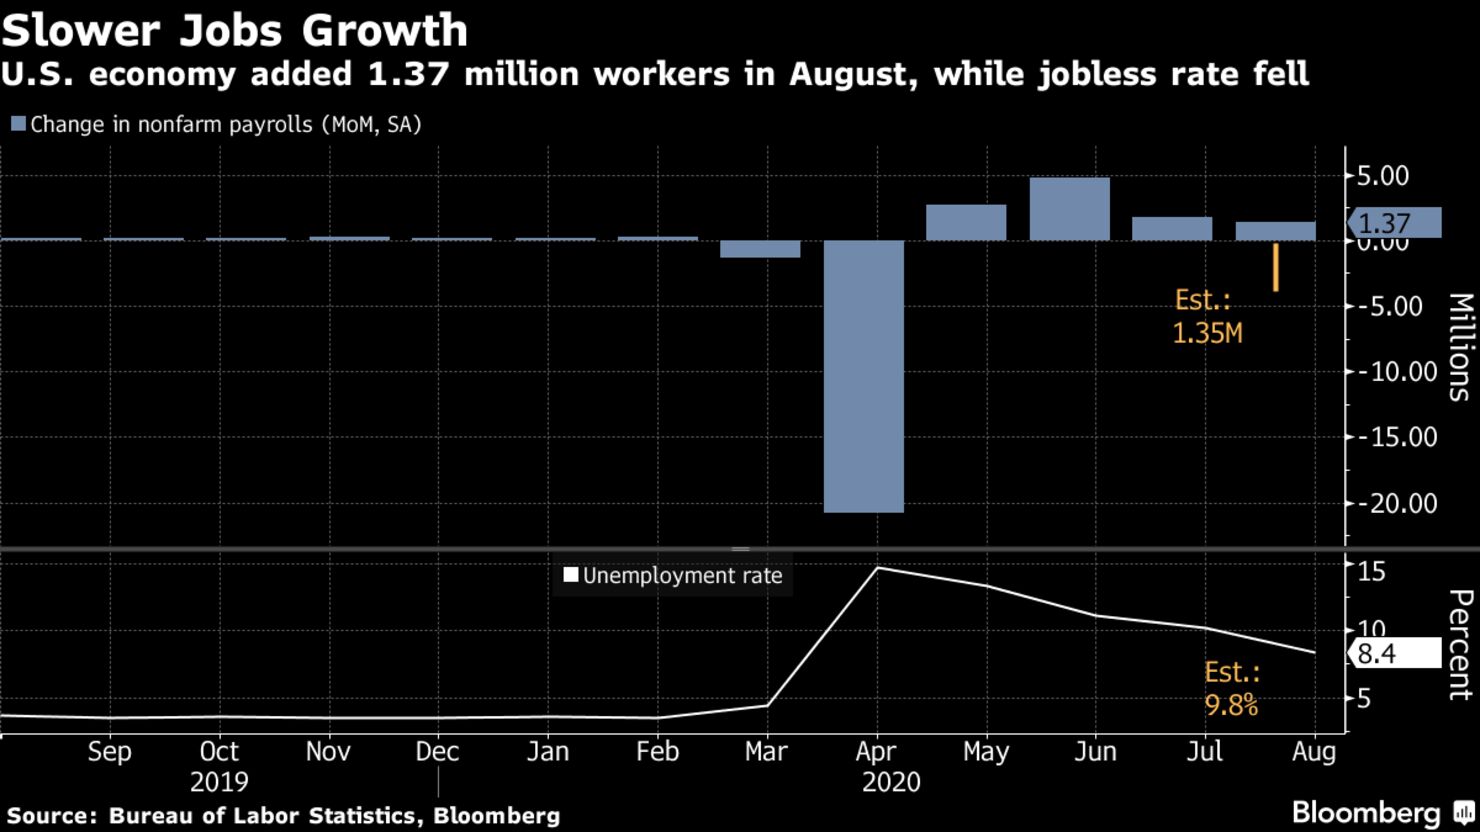 U.S. economy added 1.37 million workers in August, while jobless rate fell